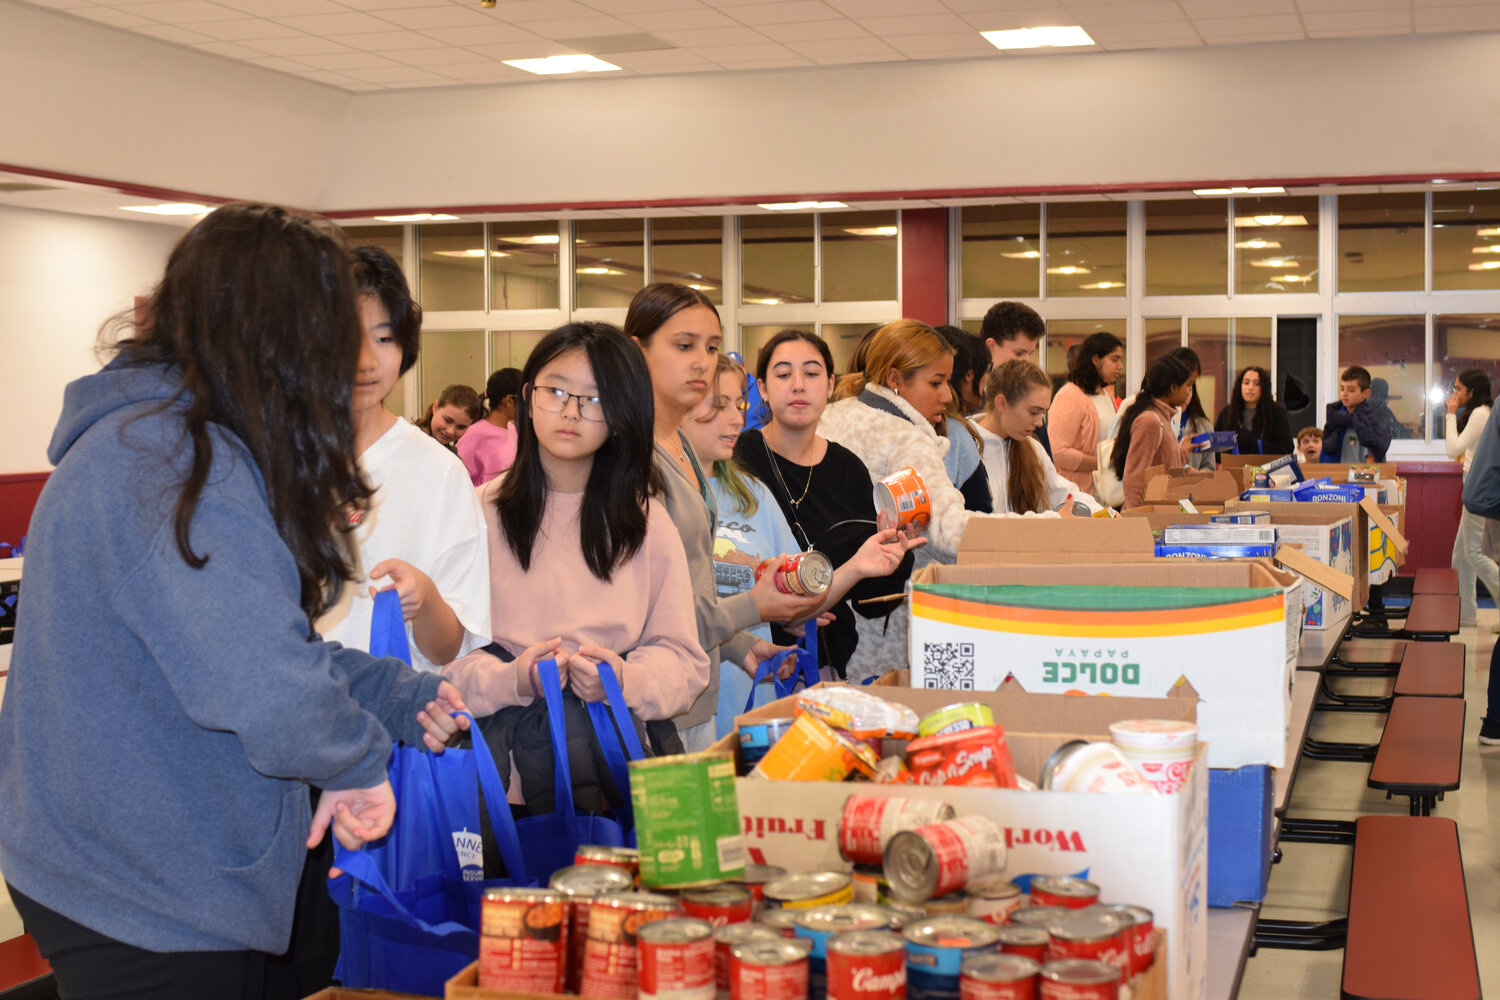 The Kiwanis Club of East Meadow ran a successful food drive, which all came together during a tremendous weekend of giving back to those in need. Volunteers from the club and W.T. Clarke’s High School’s Key Club helped assemble 165 baskets of food.